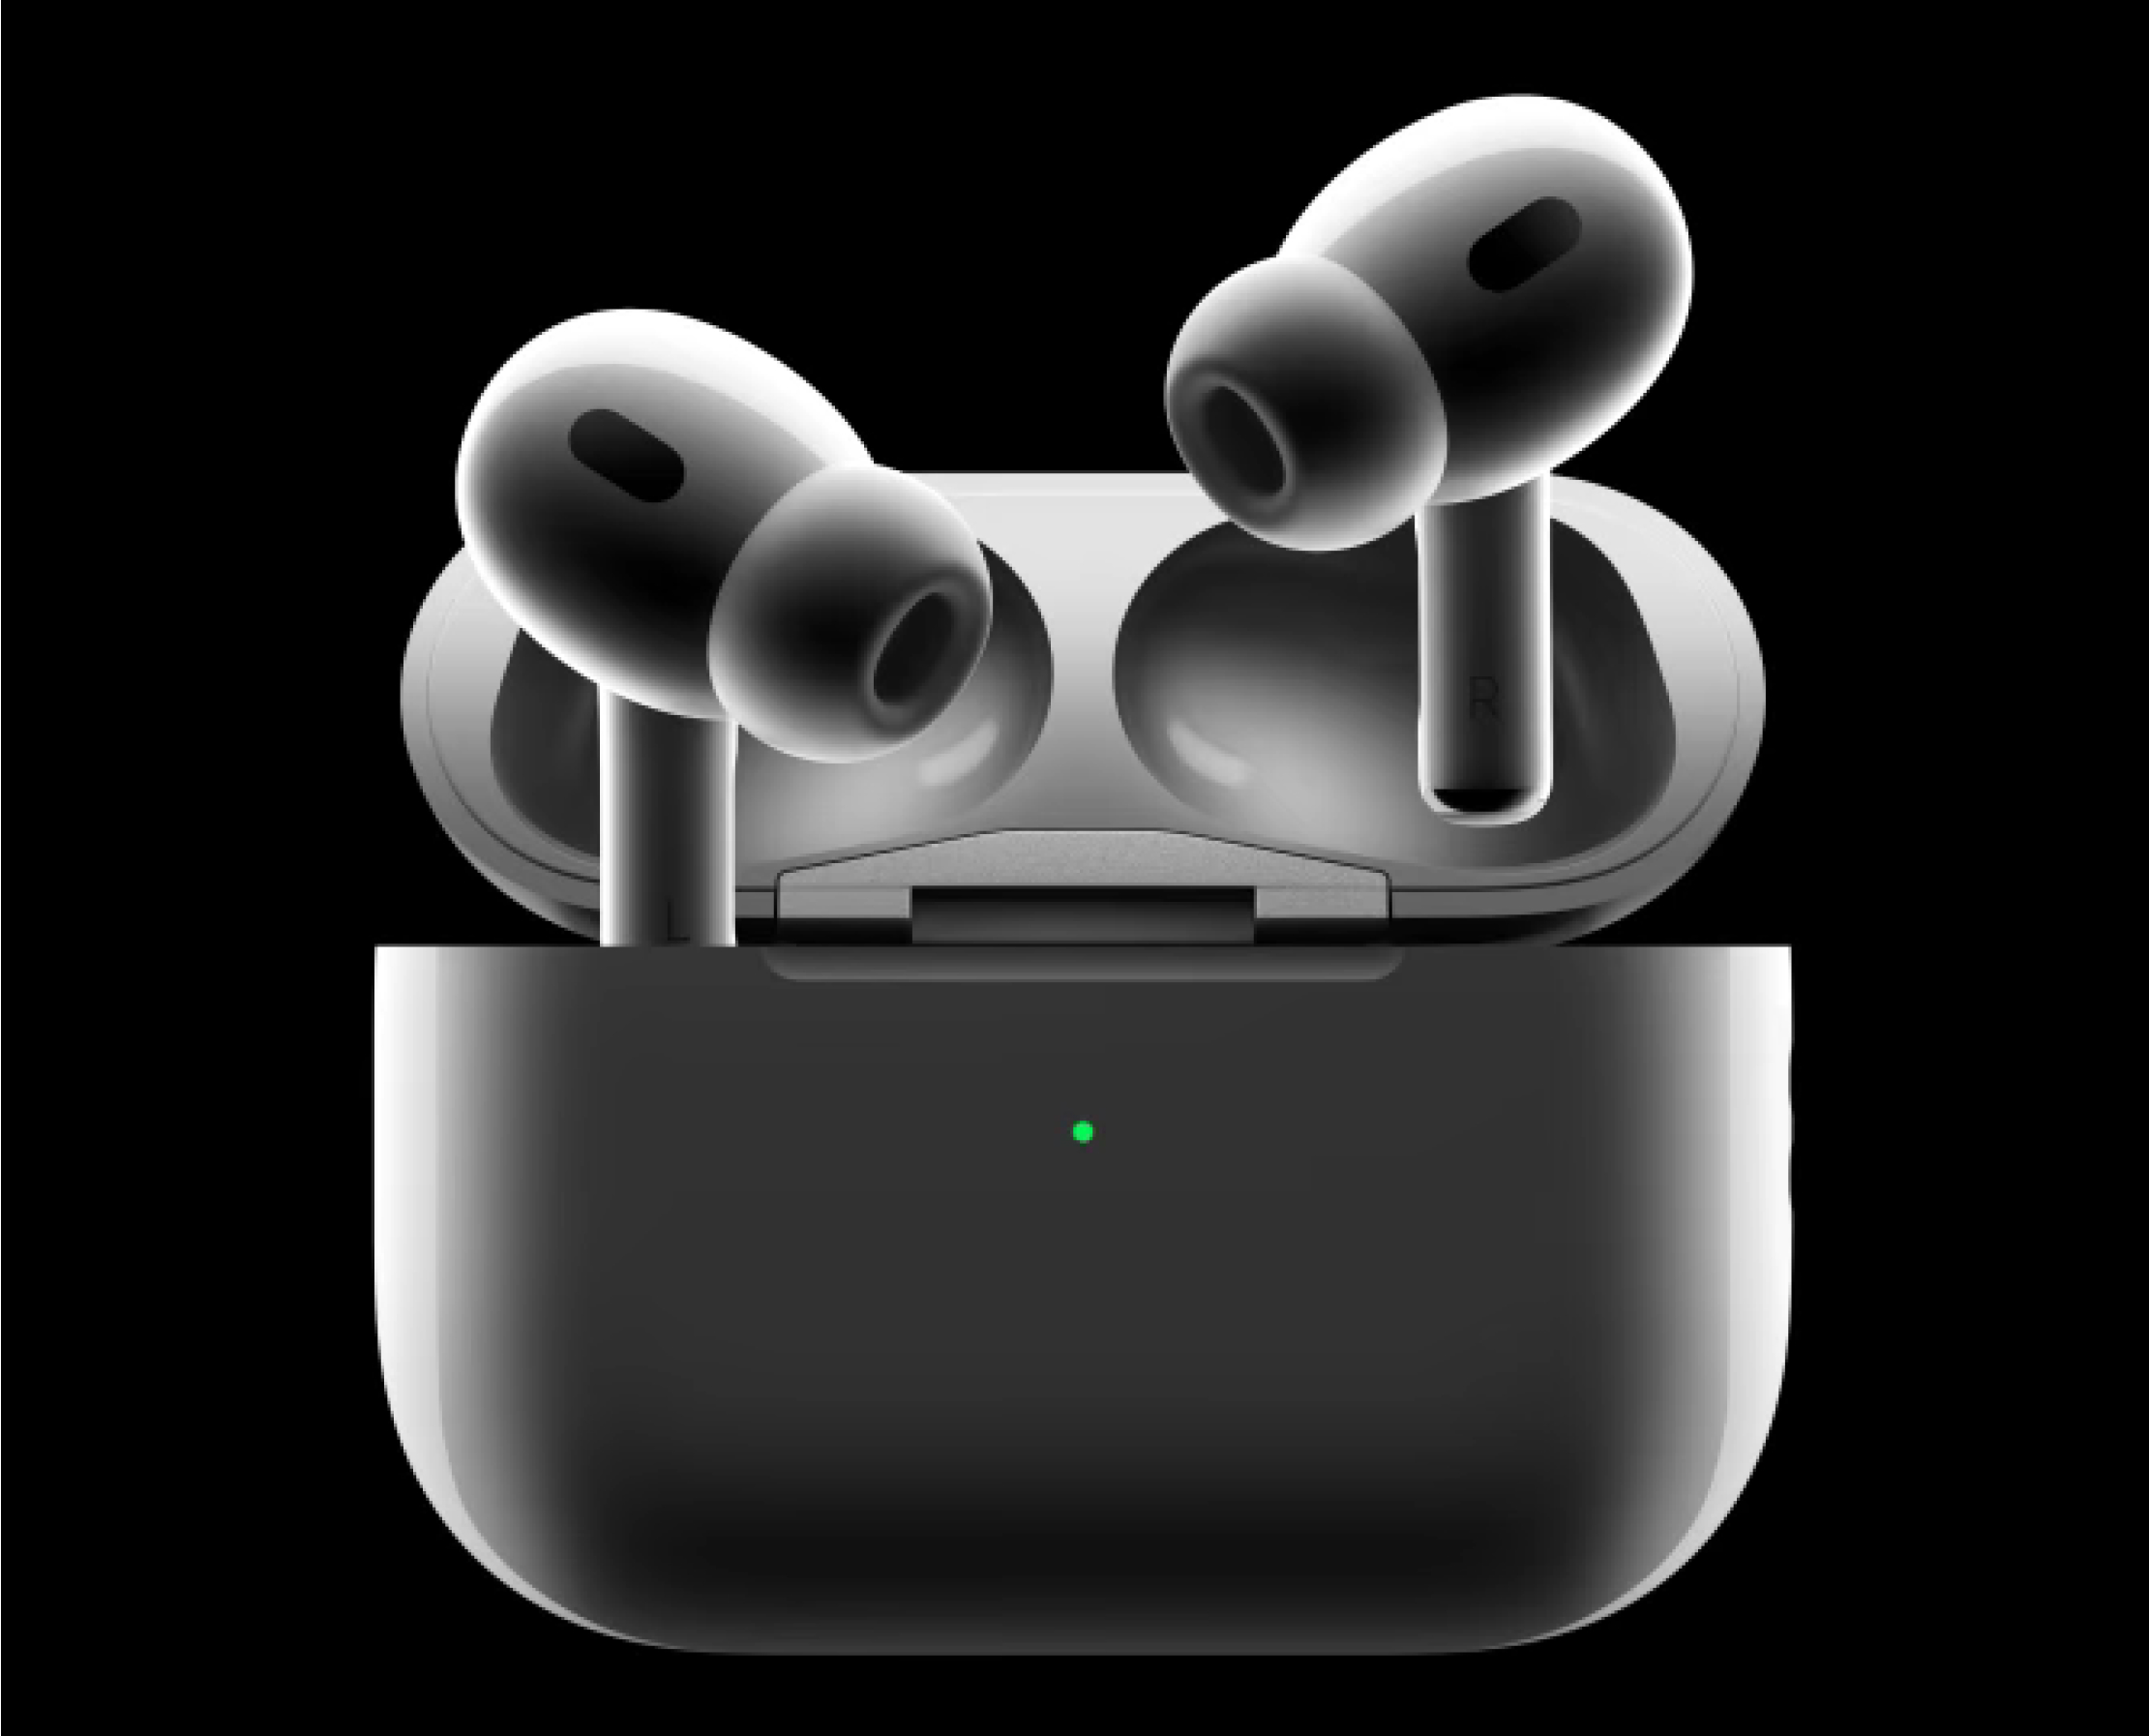 Apple Airpods Pro (second generation). Photo: Apple